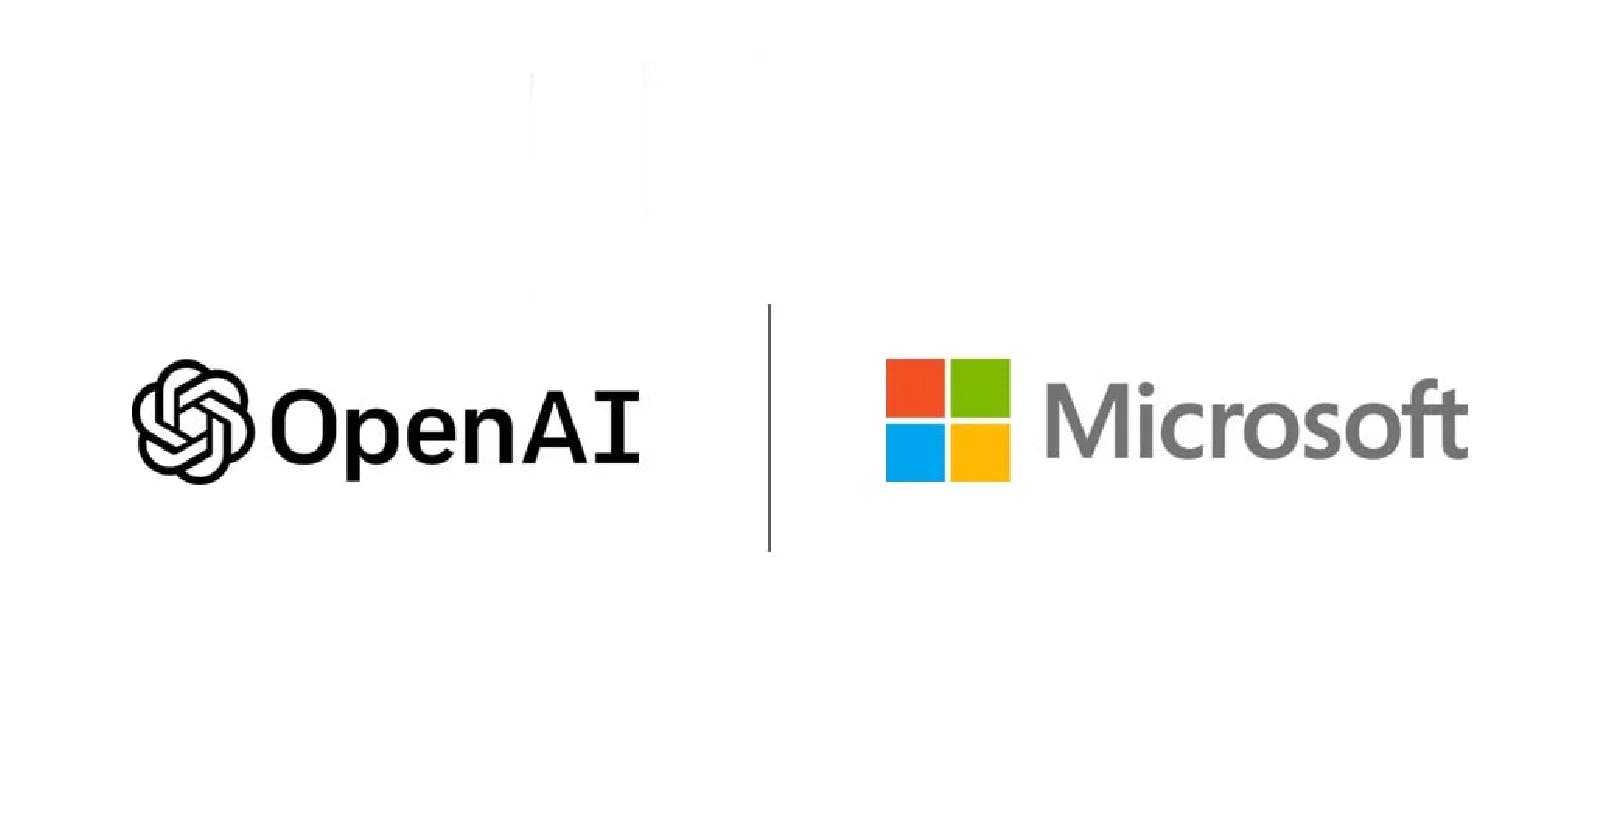 A Deep Dive into Why Microsoft is Unlikely to Fully Acquire OpenAI